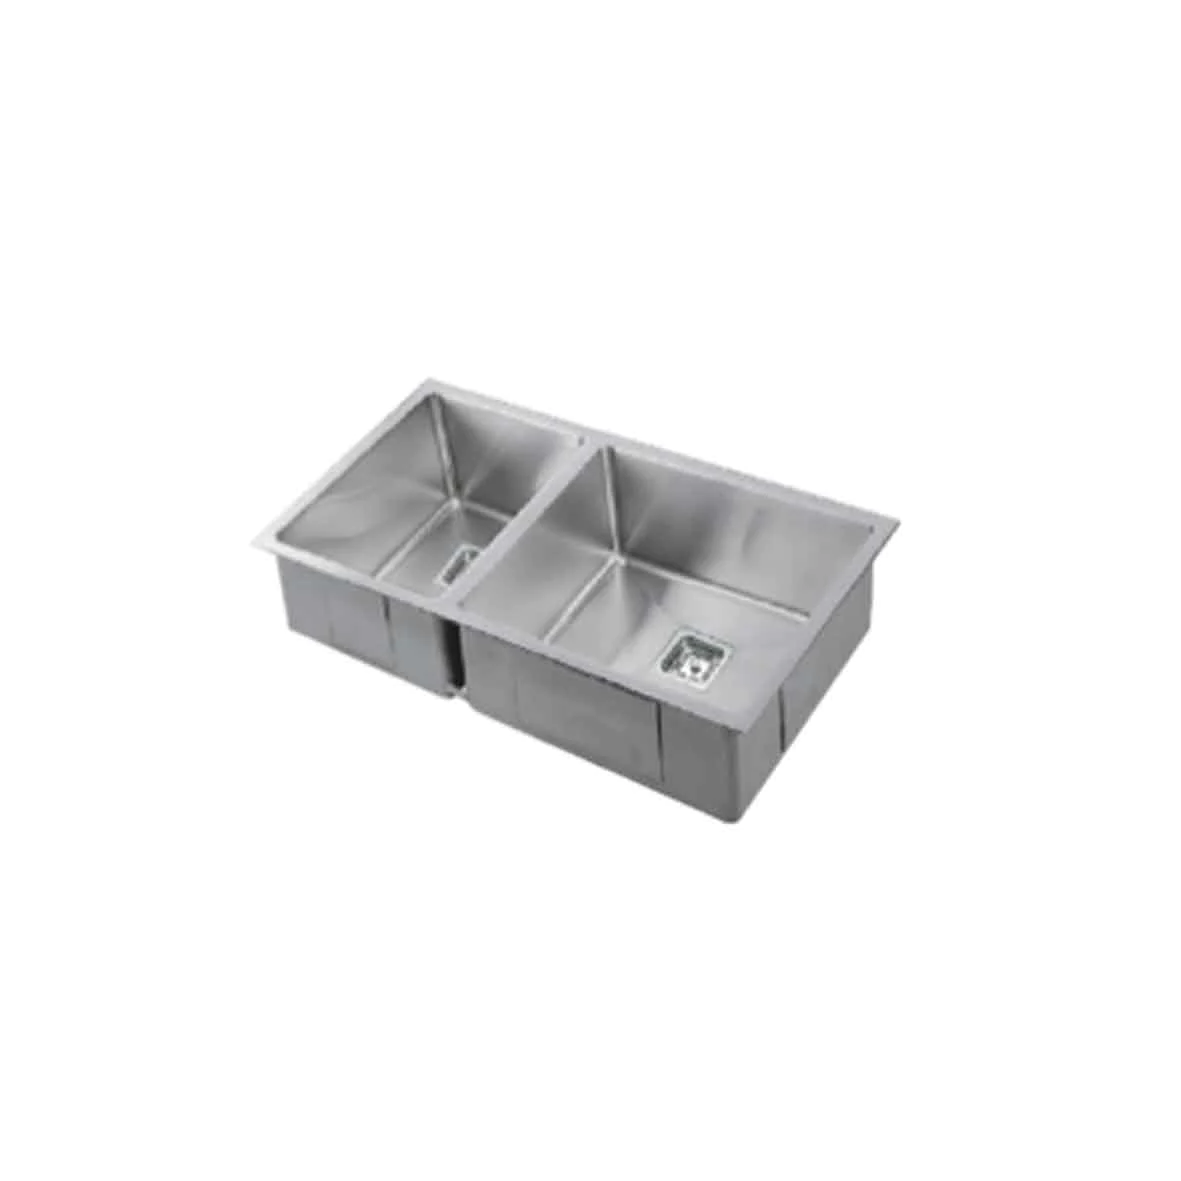 VEROTTI INOX 1 1/2 BOWL UNIVERSAL STAINLESS STEEL KITCHEN SINK 670MM (AVAILABLE IN LEFT OR RIGHT CONFIGURATION)